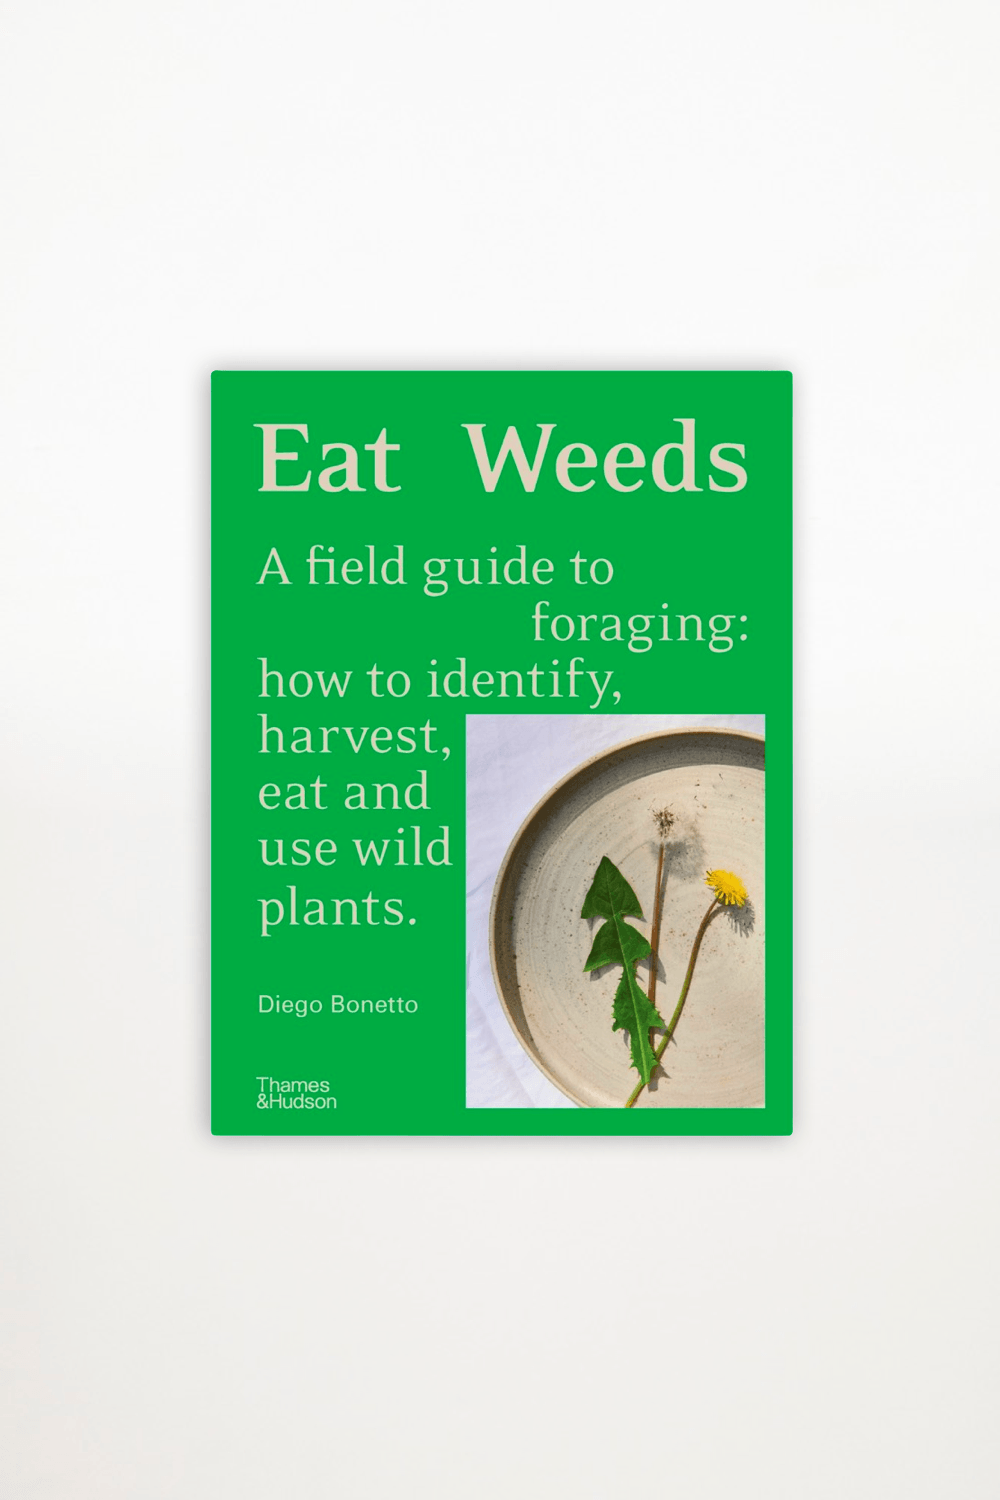 Diego Bonetto - Eat Weeds - A field guide to foraging - Ensemble Studios